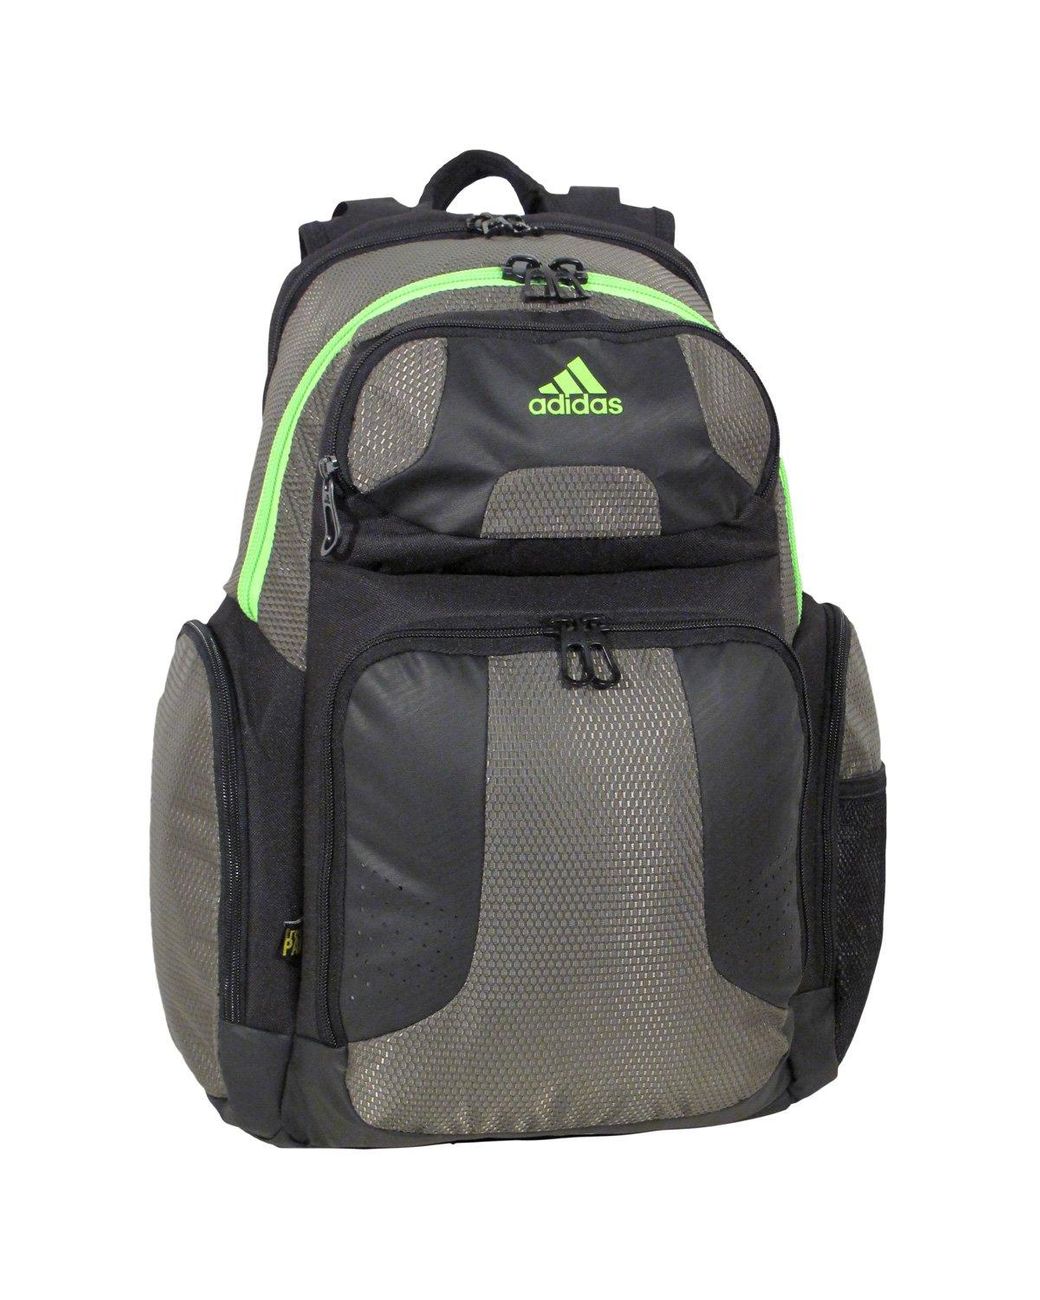 adidas Unisex-adult Strength Backpack in Gray | Lyst